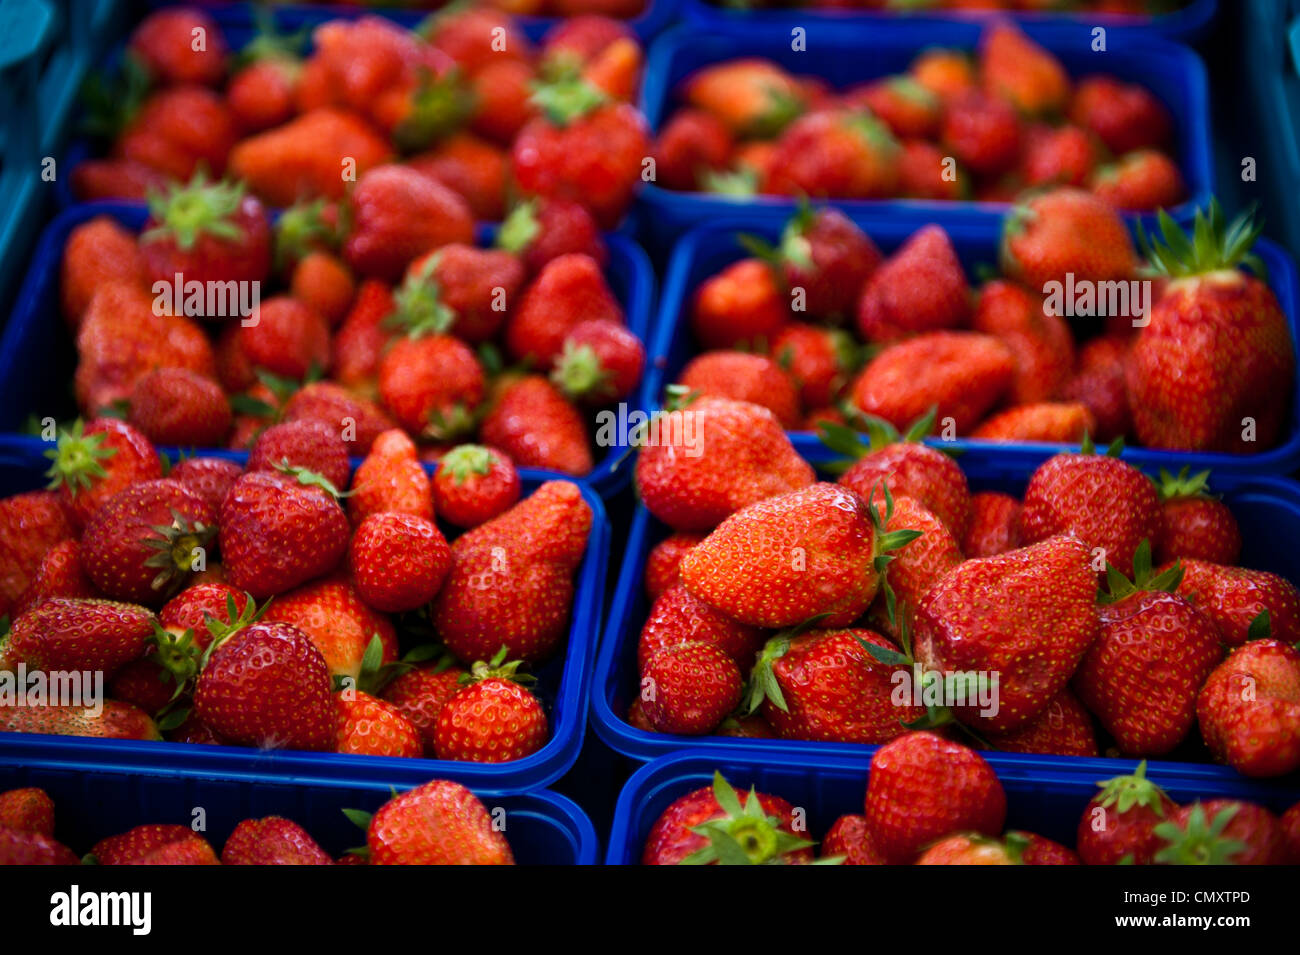 An arrangement of groups of strawberries in blue baskets. Stock Photo